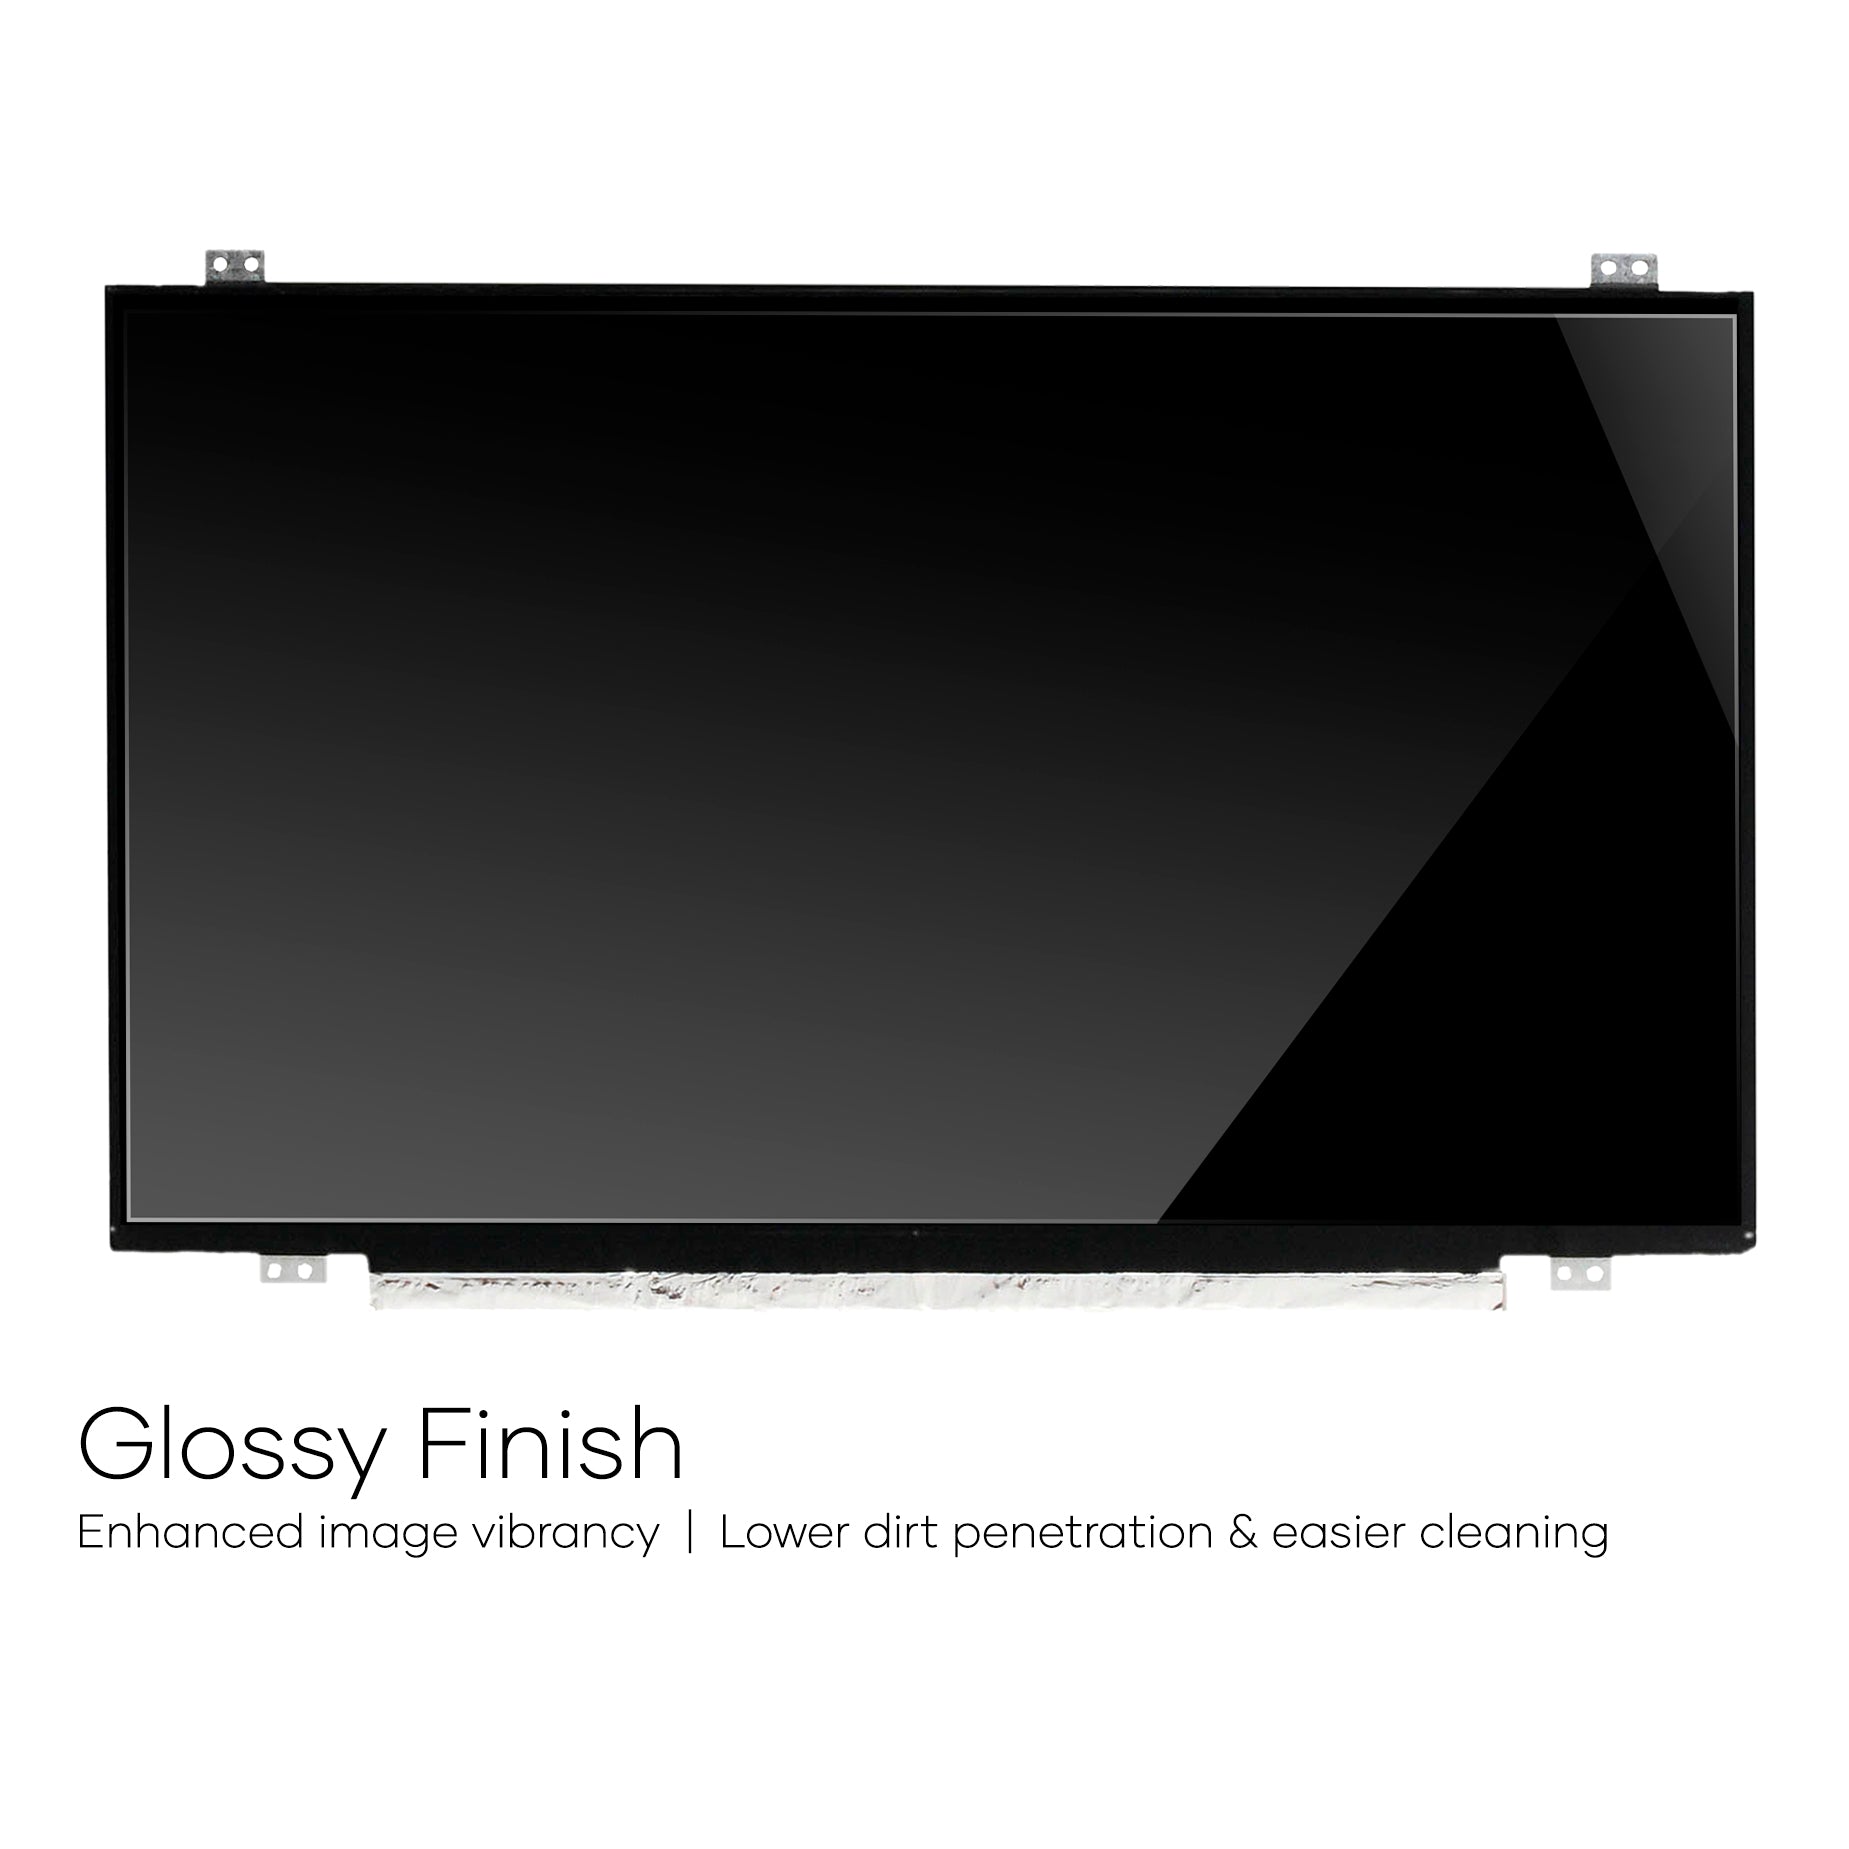 Screen Replacement for N140BGE-EA3 REV.C2 HD 1366x768 Glossy LCD LED Display